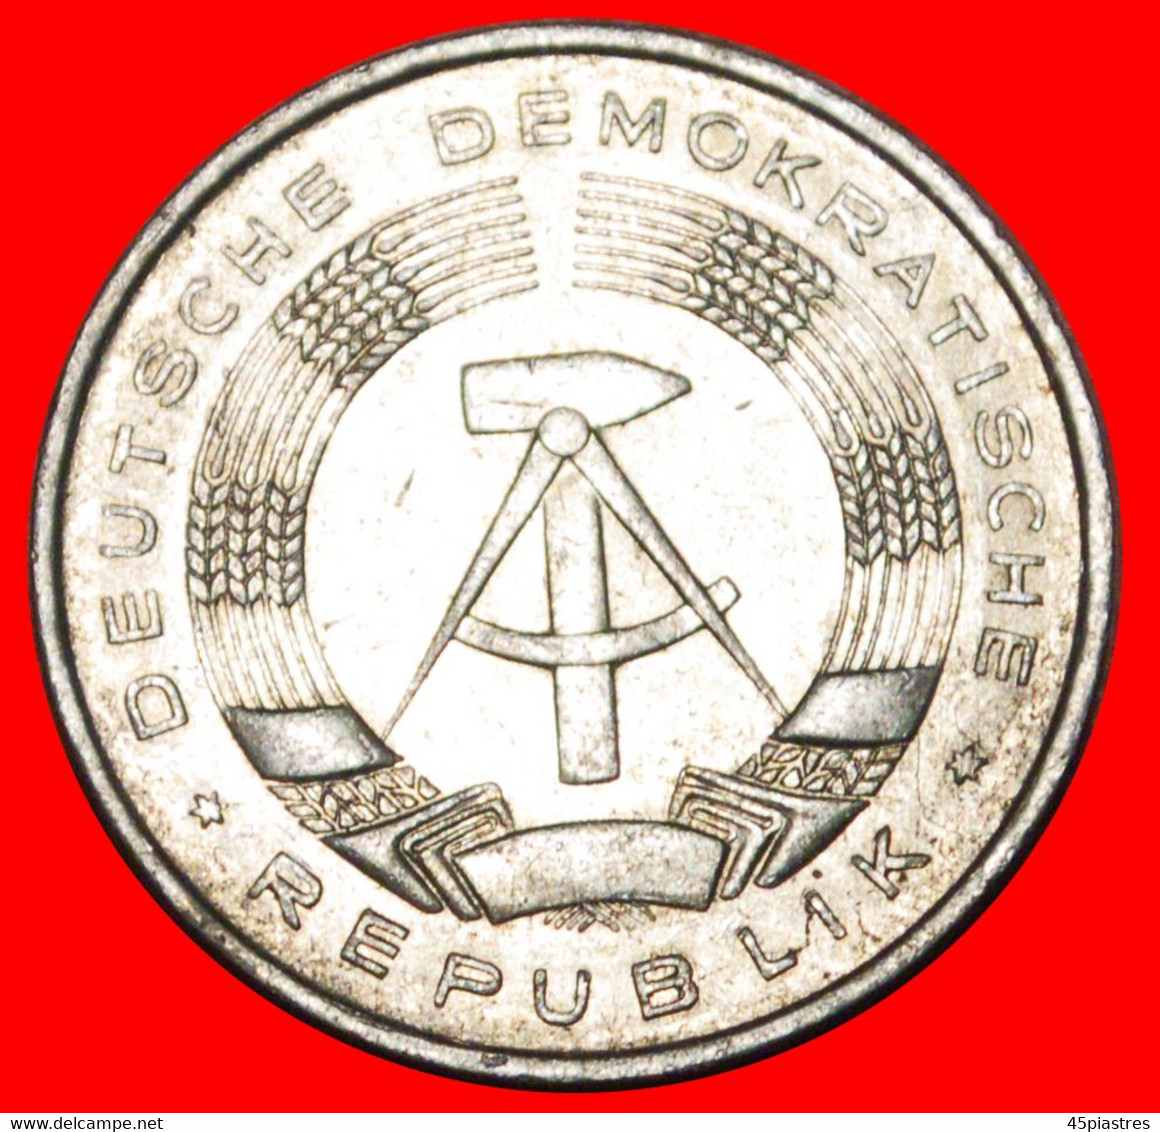 * DEUTSCHE MARK (1956-1963)★ GERMANY ★ 1 MARK 1963A! DISCOVERY COIN! LOW START ★ NO RESERVE! - 1 Marco